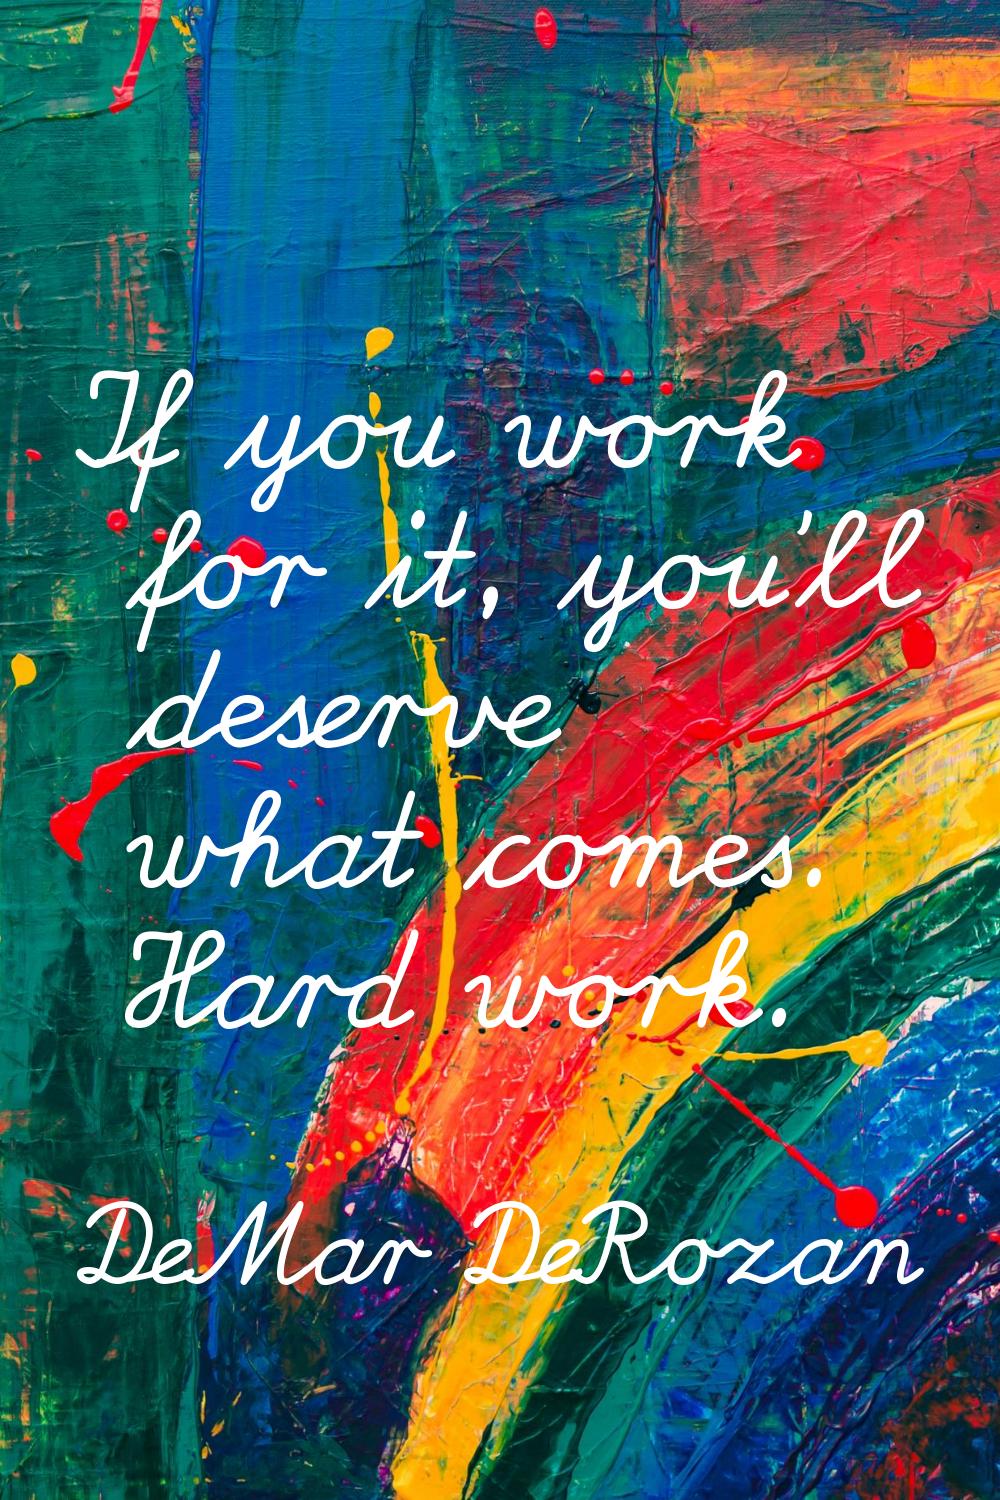 If you work for it, you'll deserve what comes. Hard work.